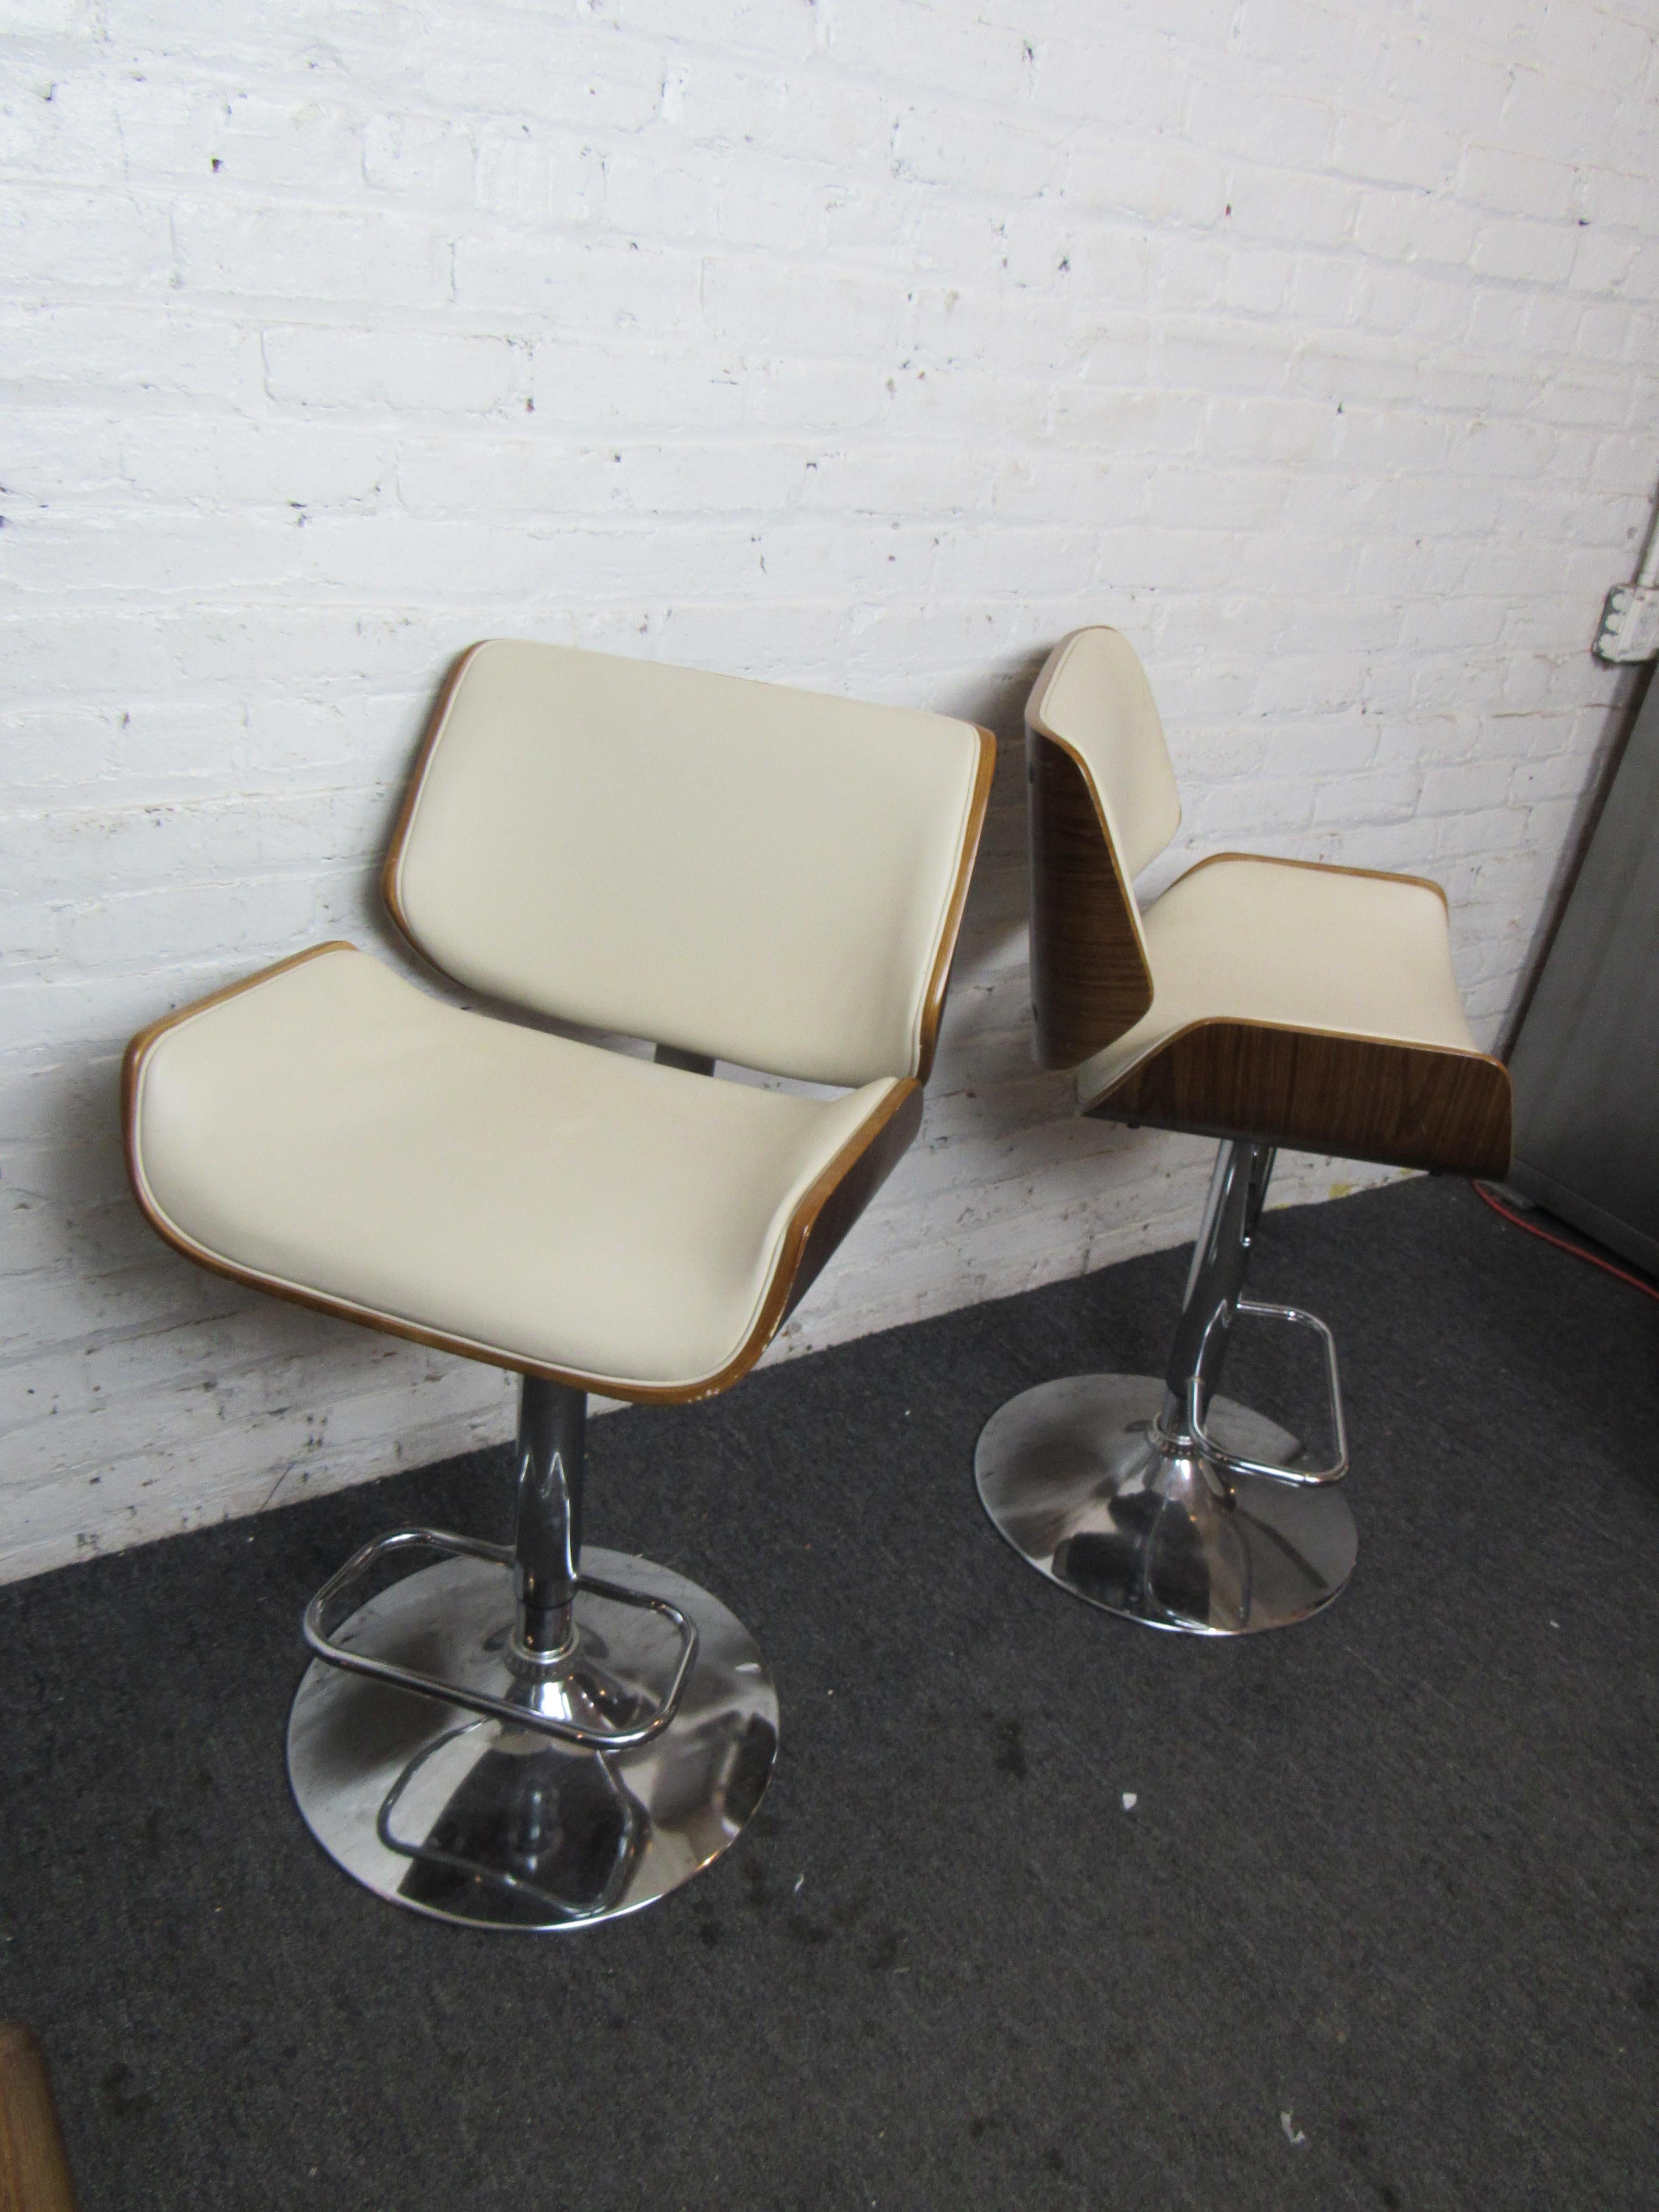 A beautiful Mid-Century Modern pair of barstools that combine unique seats of walnut and vinyl with chrome bases. The seats are adjustable from a seat height of 25